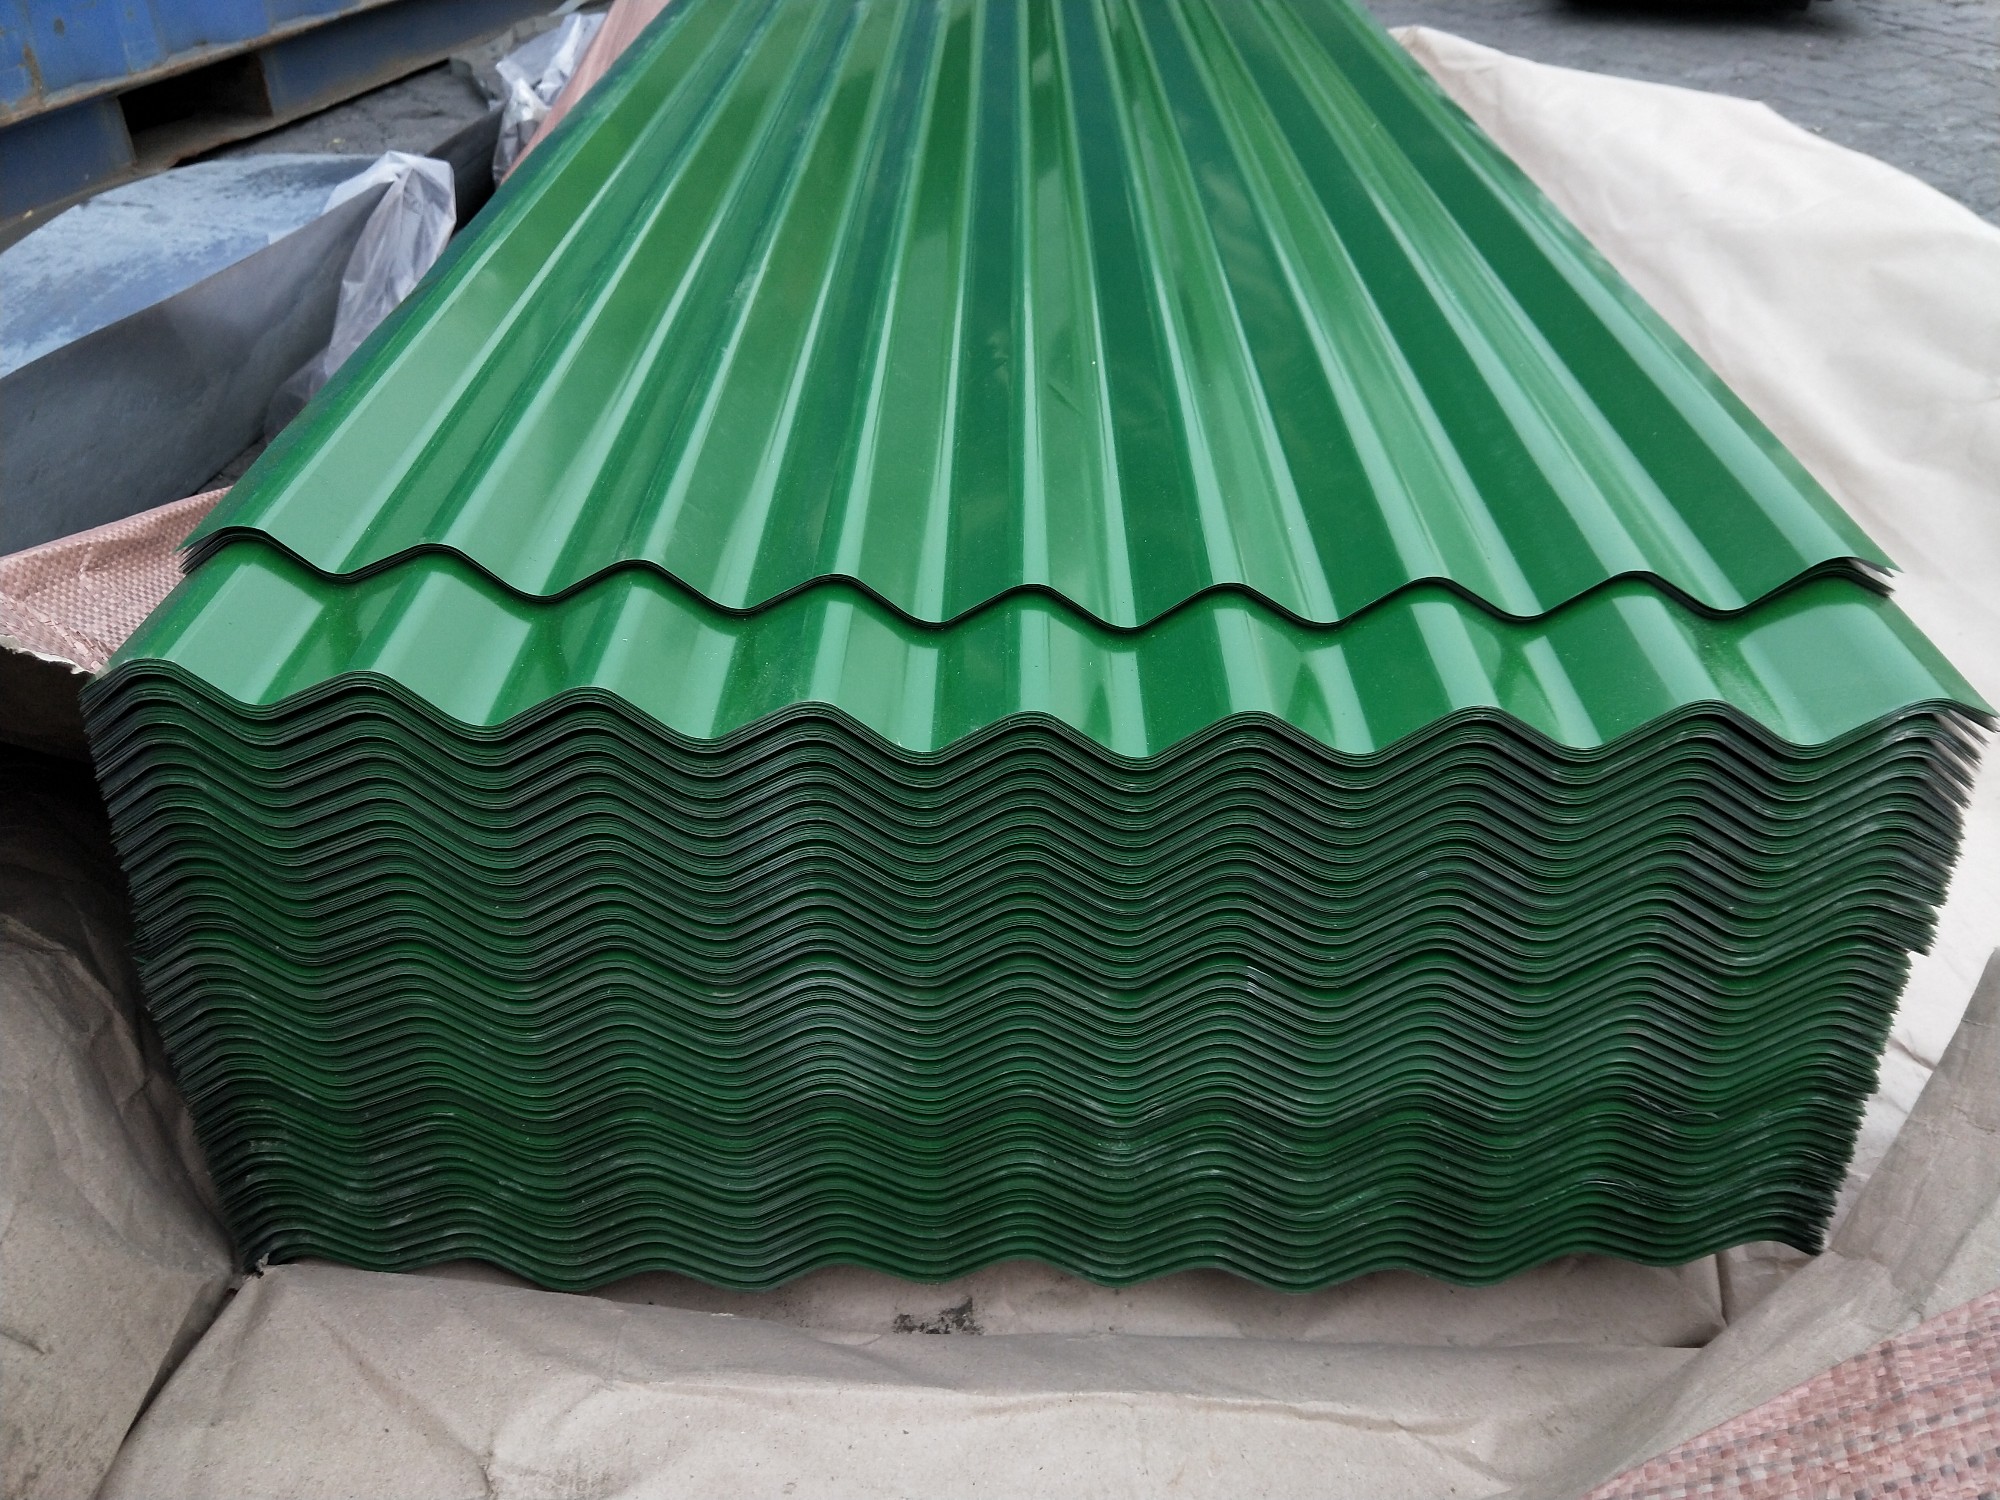 Colored Aluminum Roof Sheets Manufacturers, Colored Aluminum Roof Sheets Factory, Supply Colored Aluminum Roof Sheets